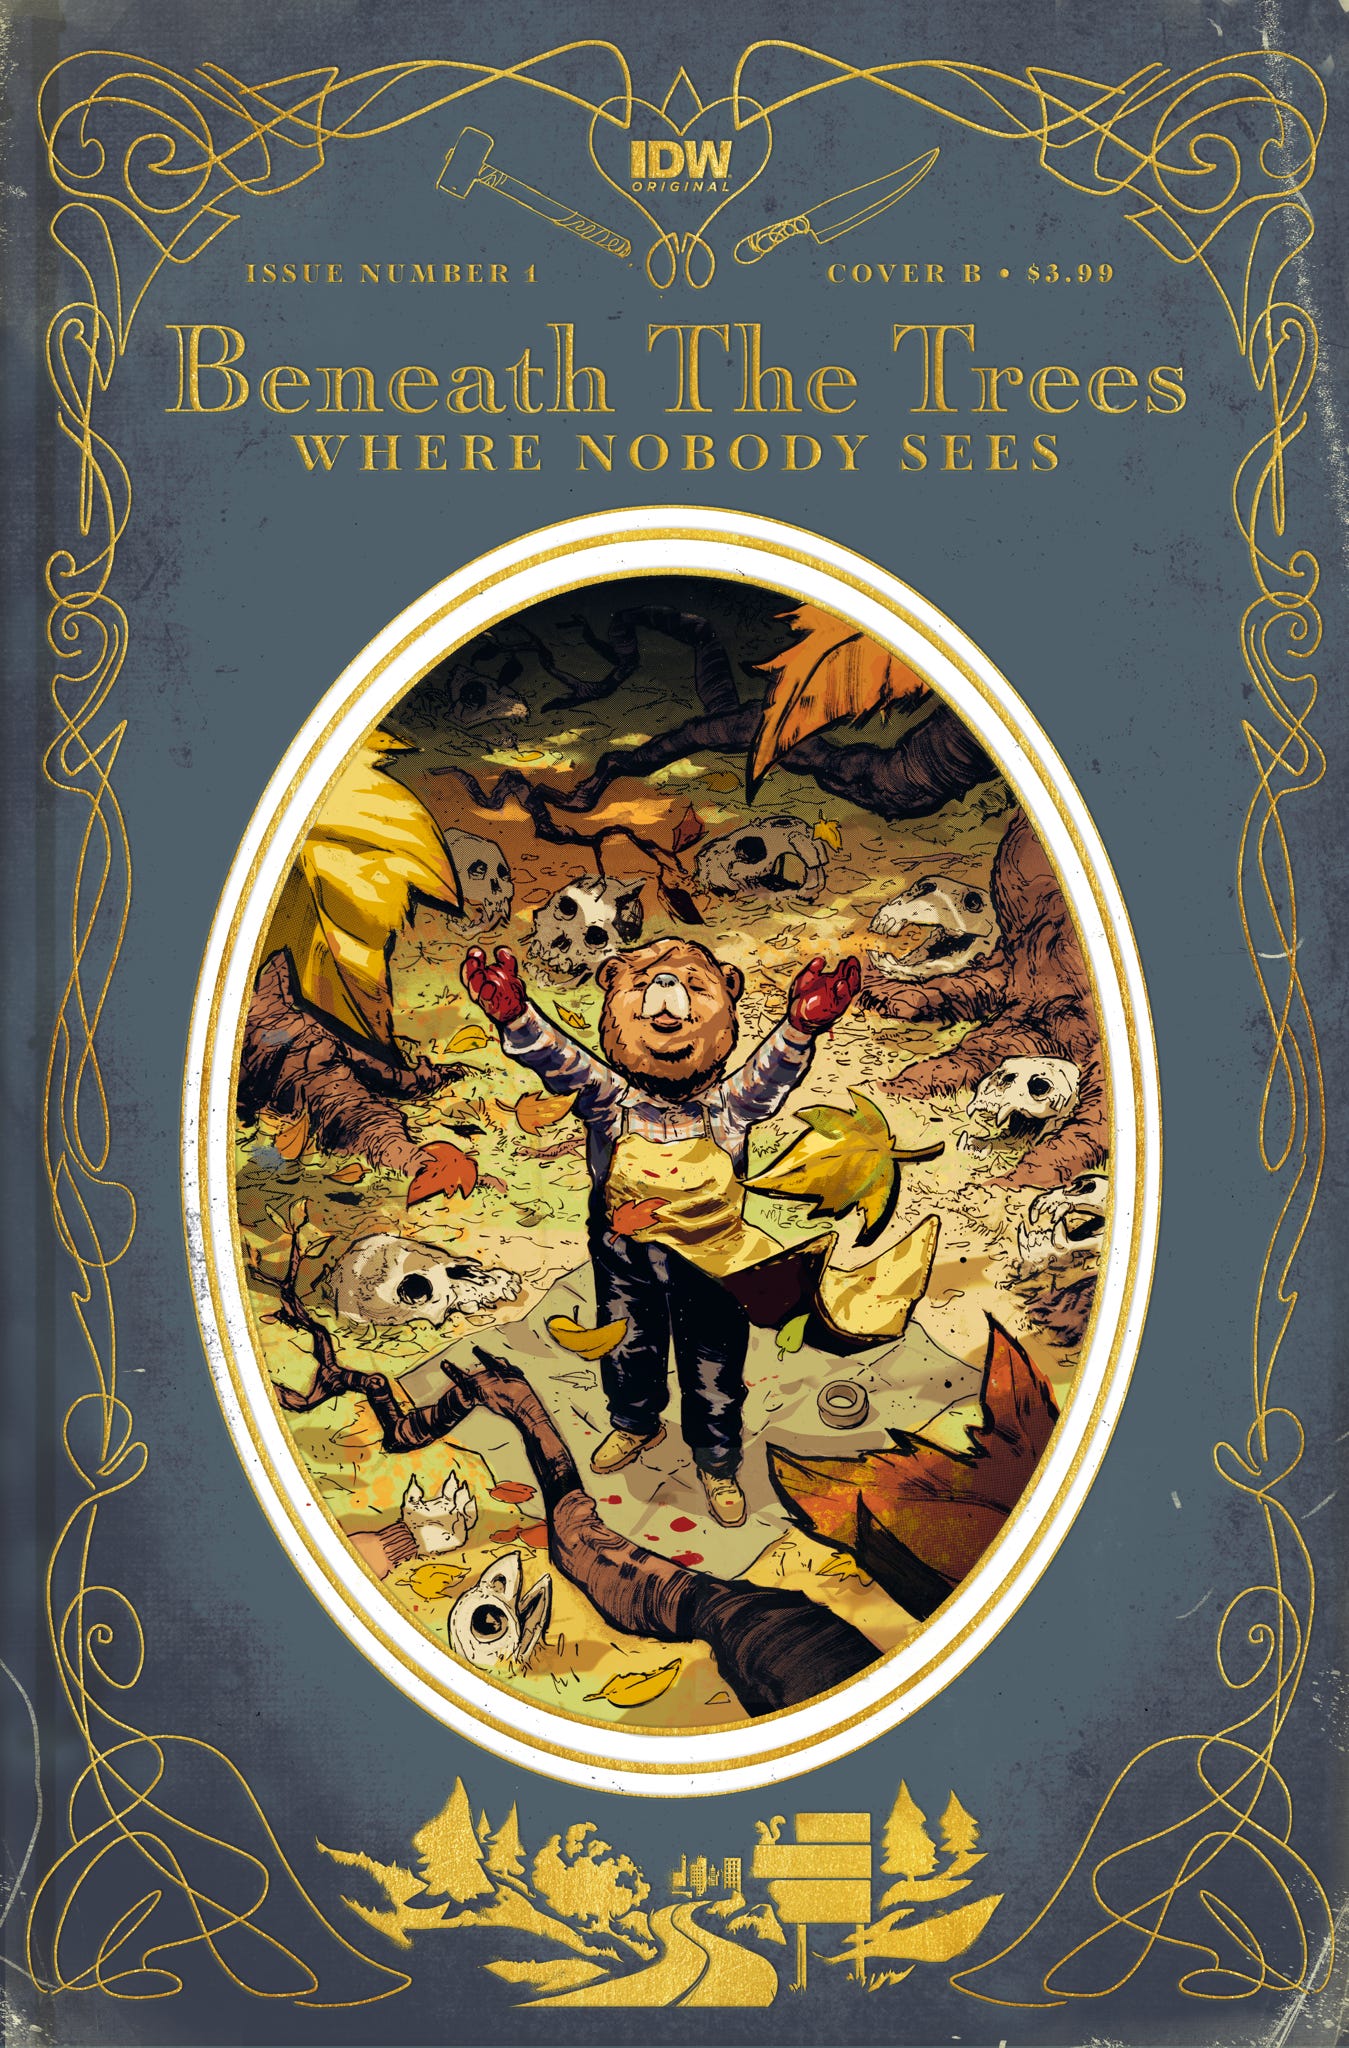 Variant cover art for issue 1 of Beneath the Trees Where Nobody Sees. It looks like a grimy storybook cover and in the center it depicts the main character Samantha raising her blood-covered arms in ecstasy as we look down upon her standing in the woods surrounded by the skeletons of her victims.